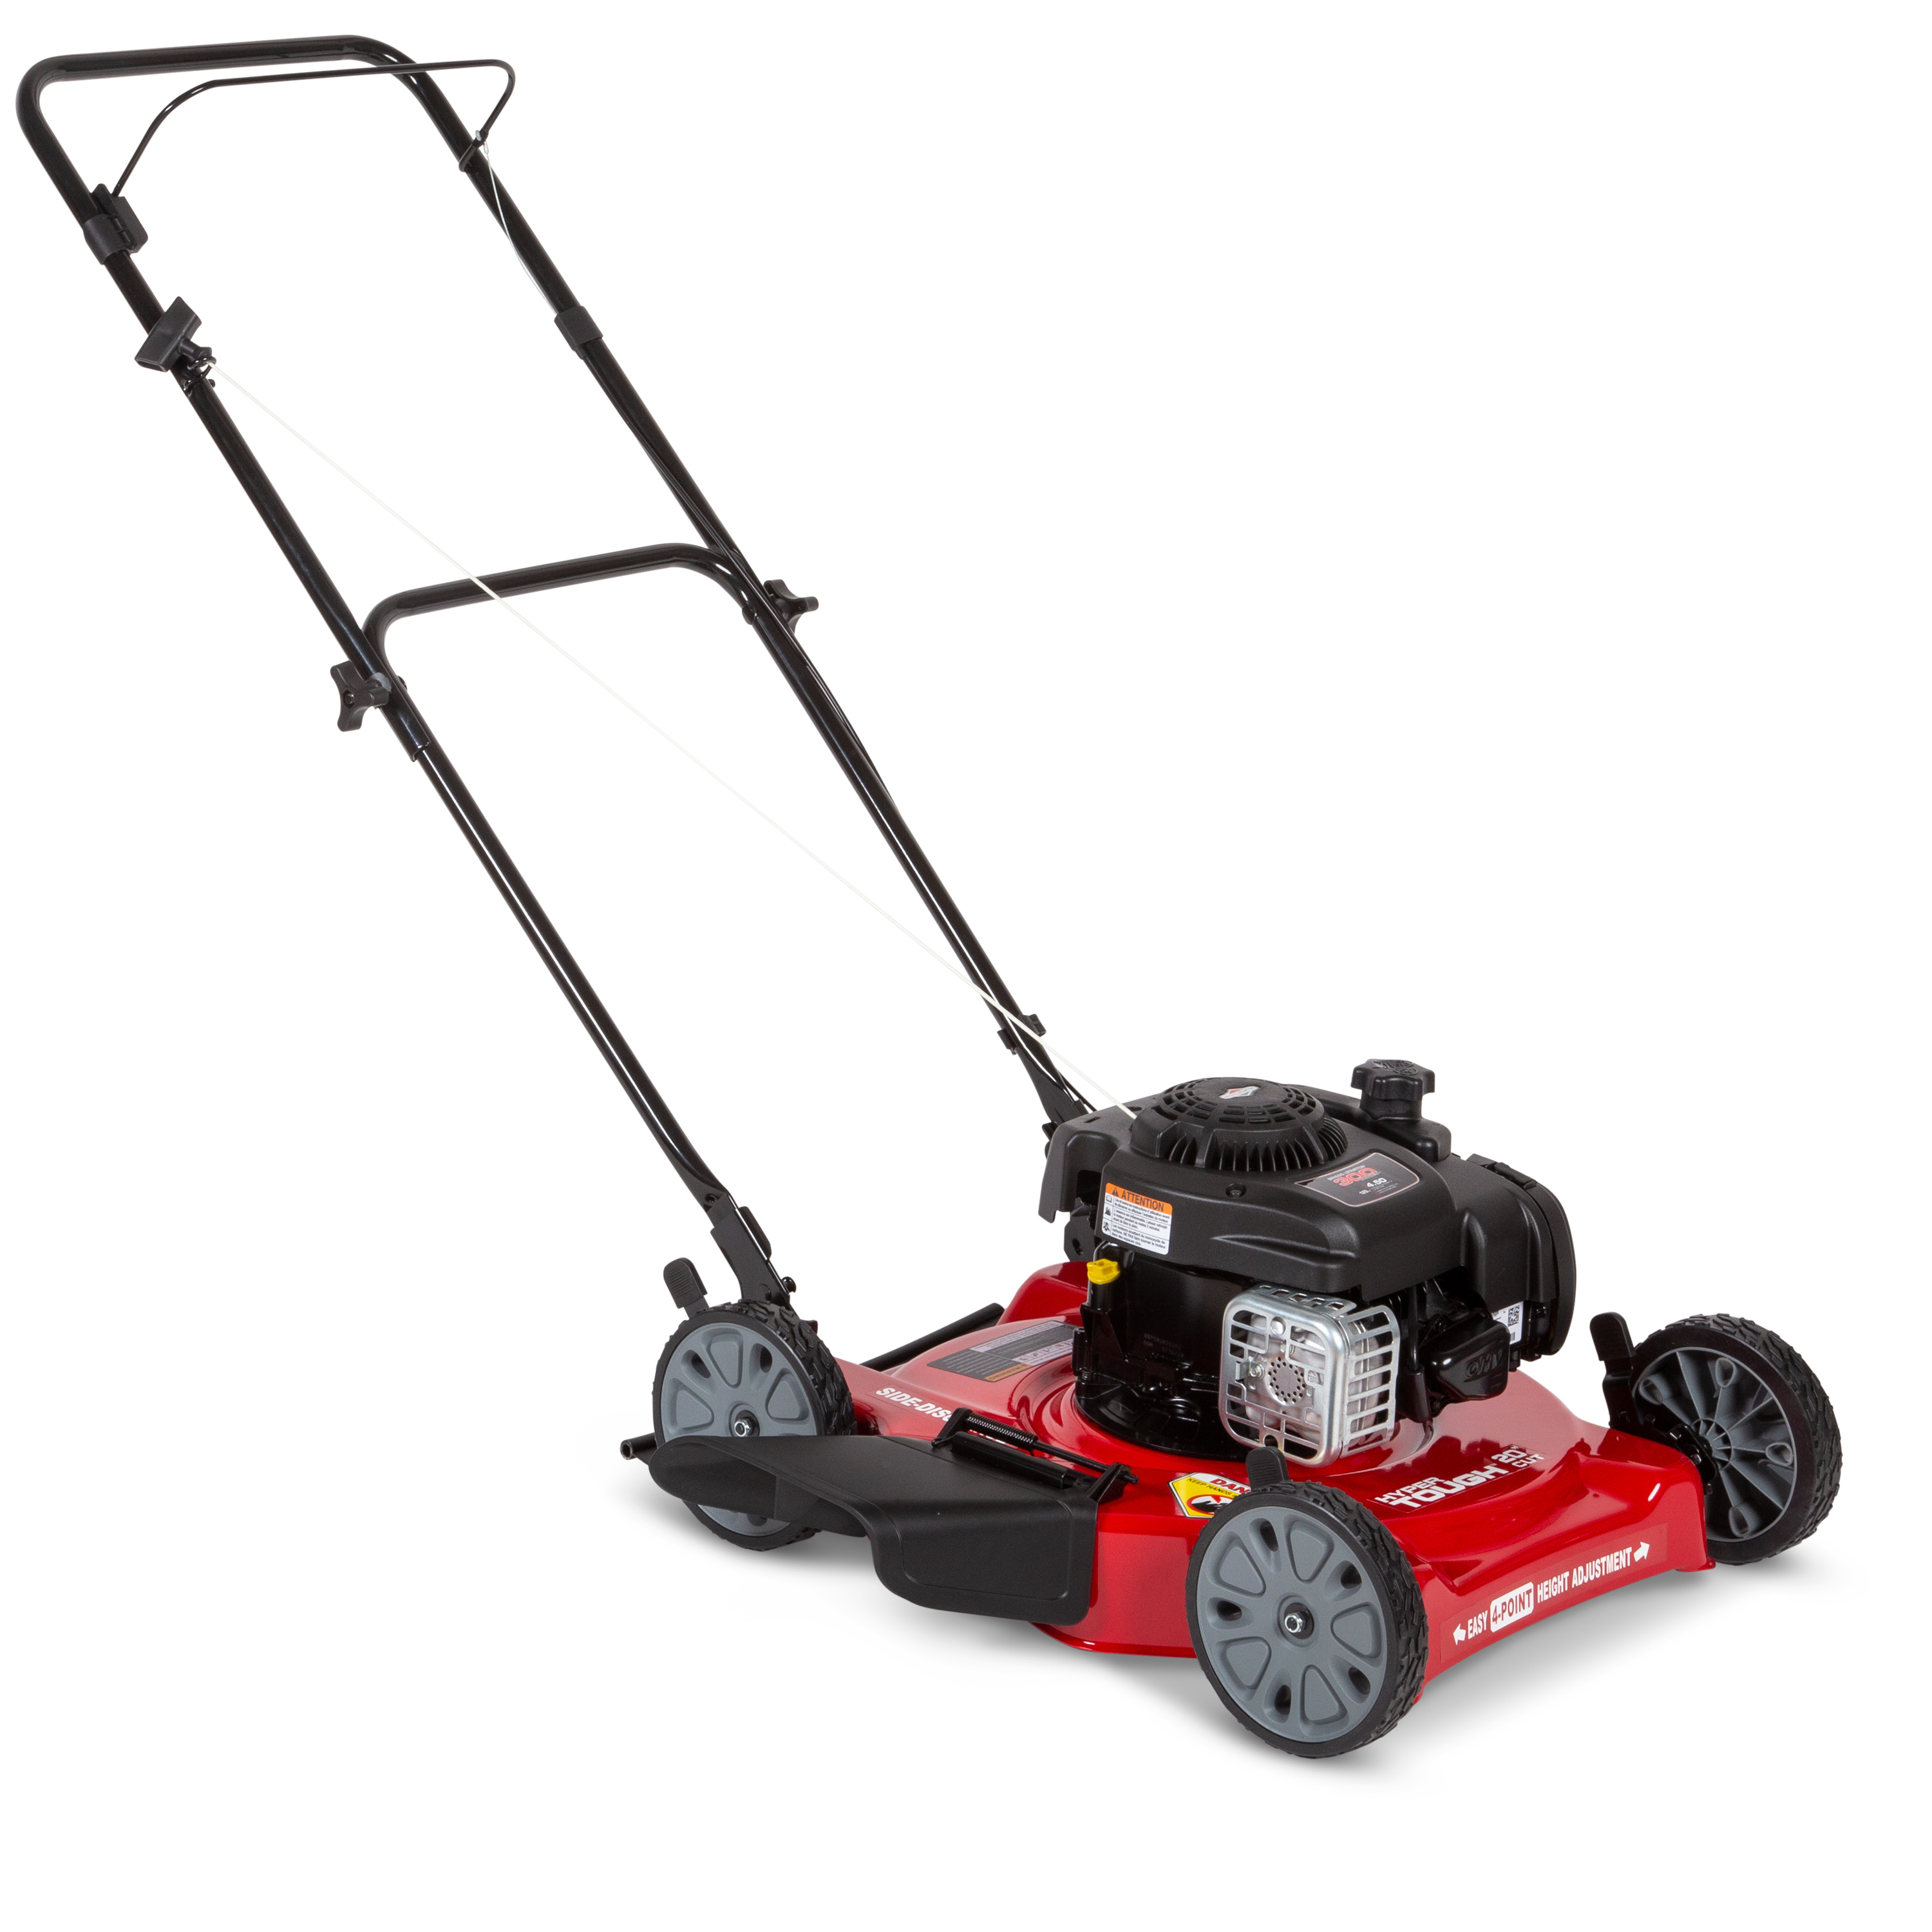 BEST GAS LAWN MOWER UNDER 100【REVIEWS & BUYING GUIDE】 TractorsHouse